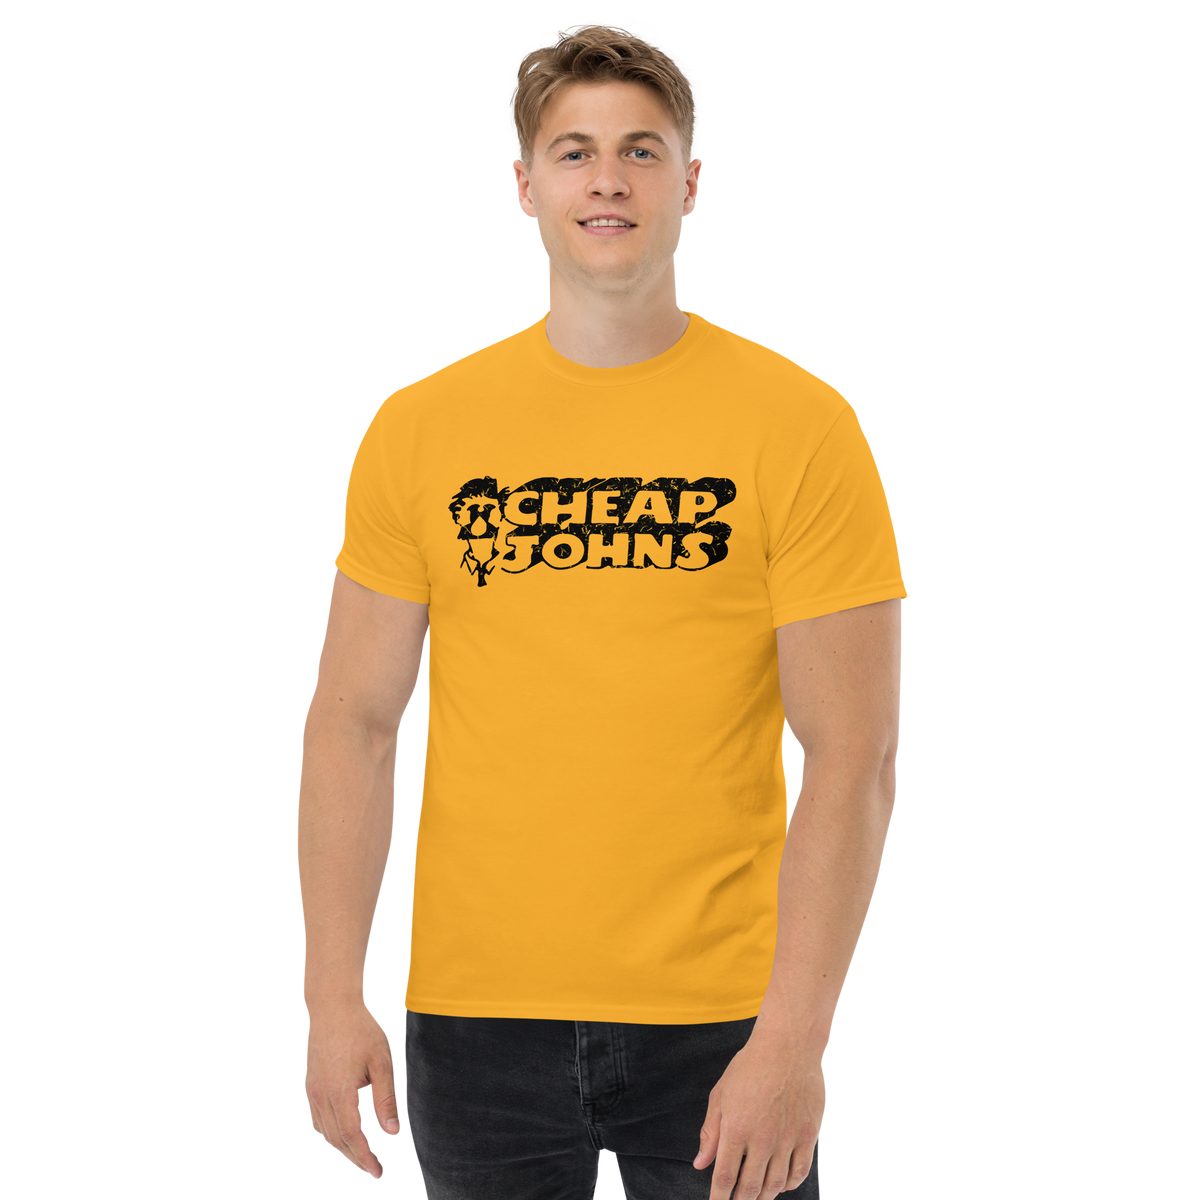  YSJZBS Mens T Shirts Casual,Super Cheap Stuff Under 1 Dollar,Plain  t Shirt,previously Purchased Items,Fashion Men,Gift Under 5 Dollars,Yellow  t Shirt Mens : Clothing, Shoes & Jewelry